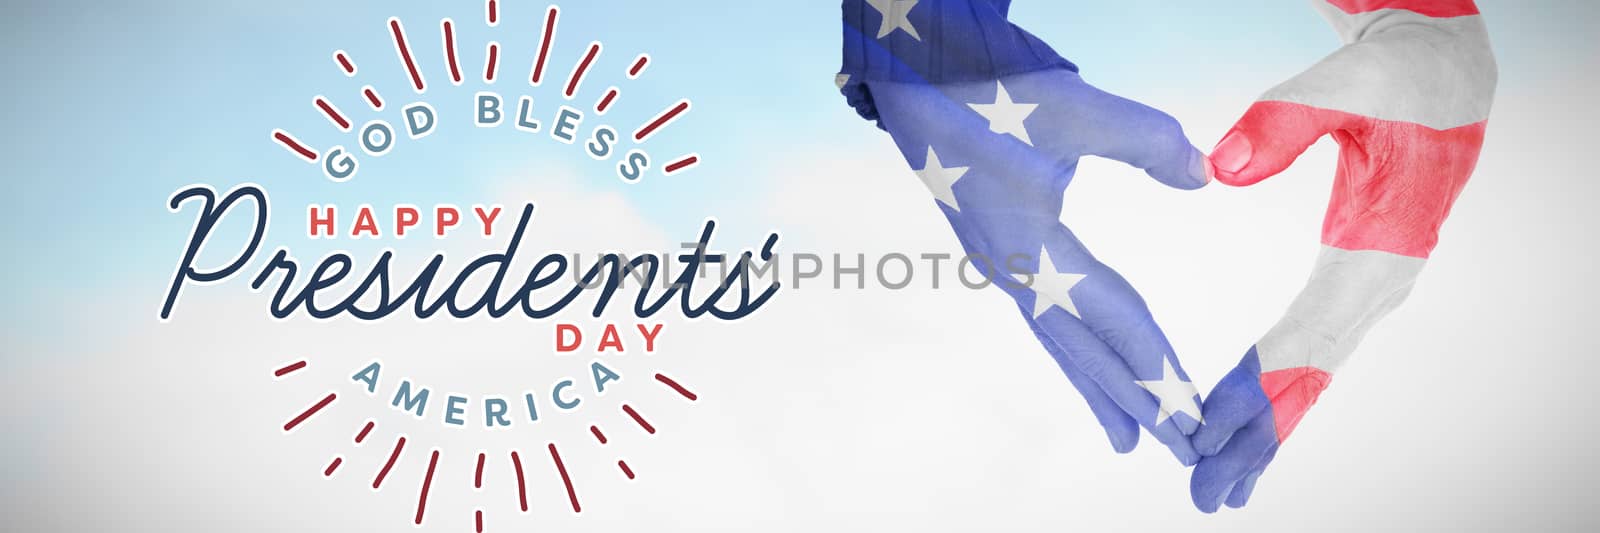 USA flag painted on hands making heart shape against blue sky with clouds 